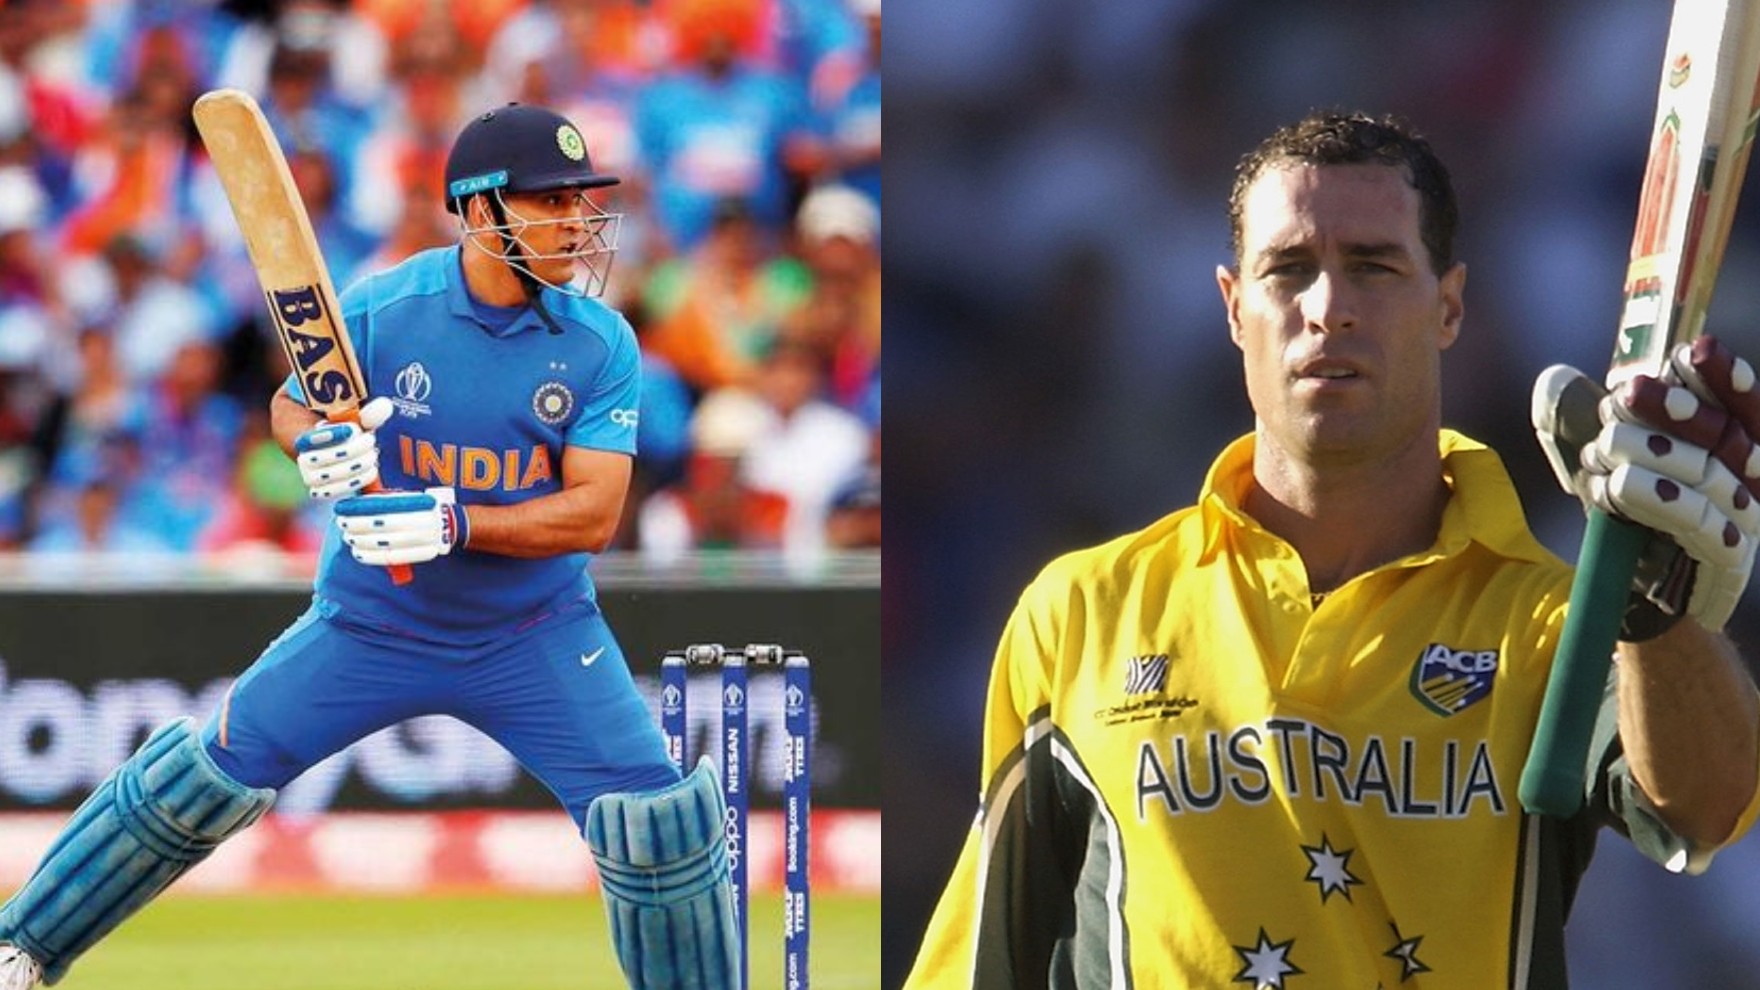 Michael Bevan says MS Dhoni is among the best finishers in the game